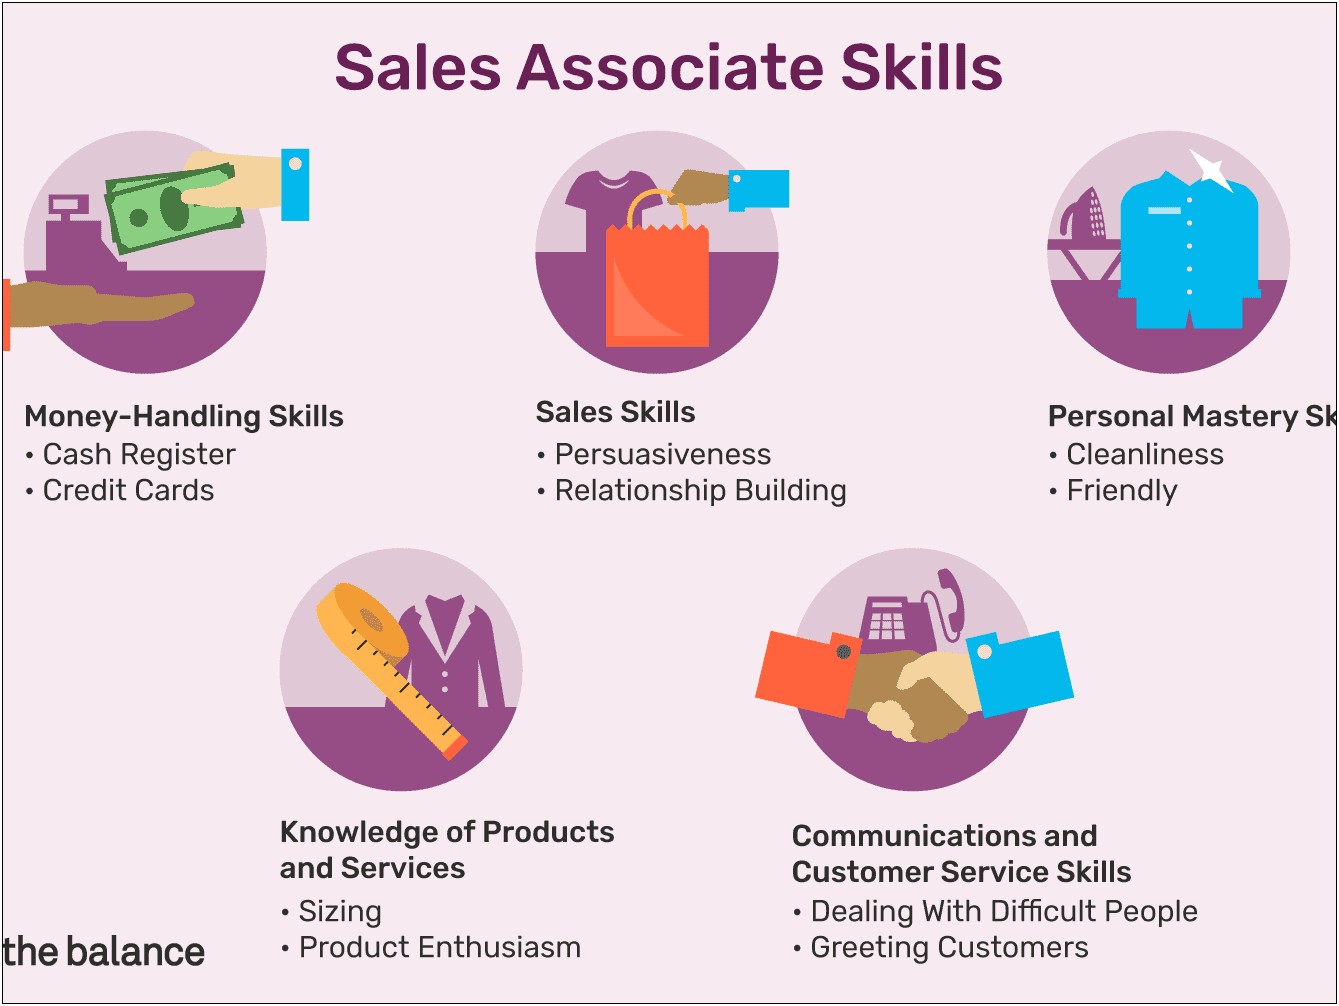 Good Skills To List In A Retail Resume